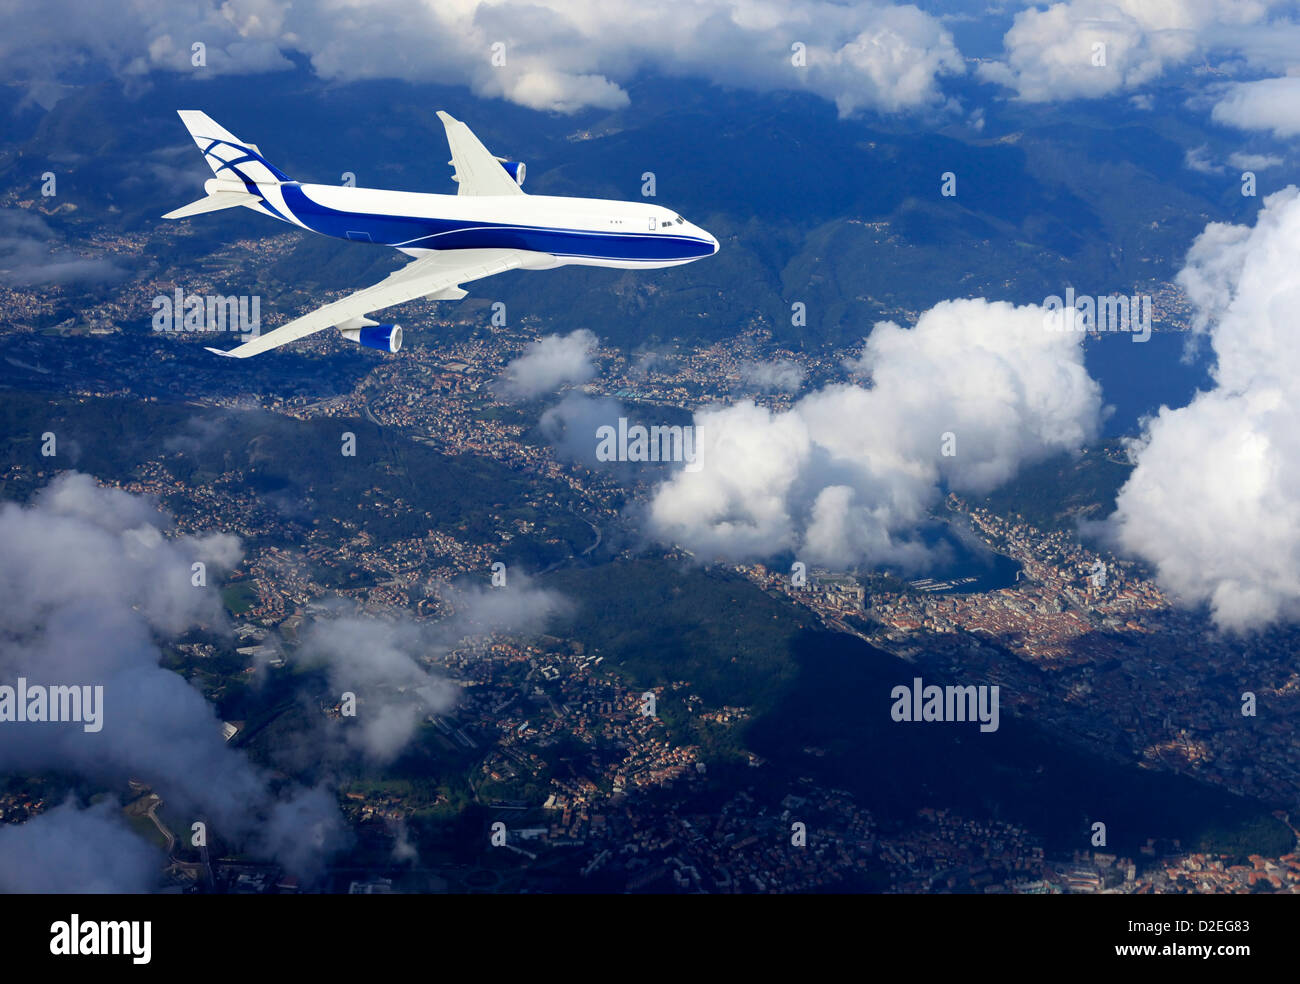 Airplane above clouds Stock Photo